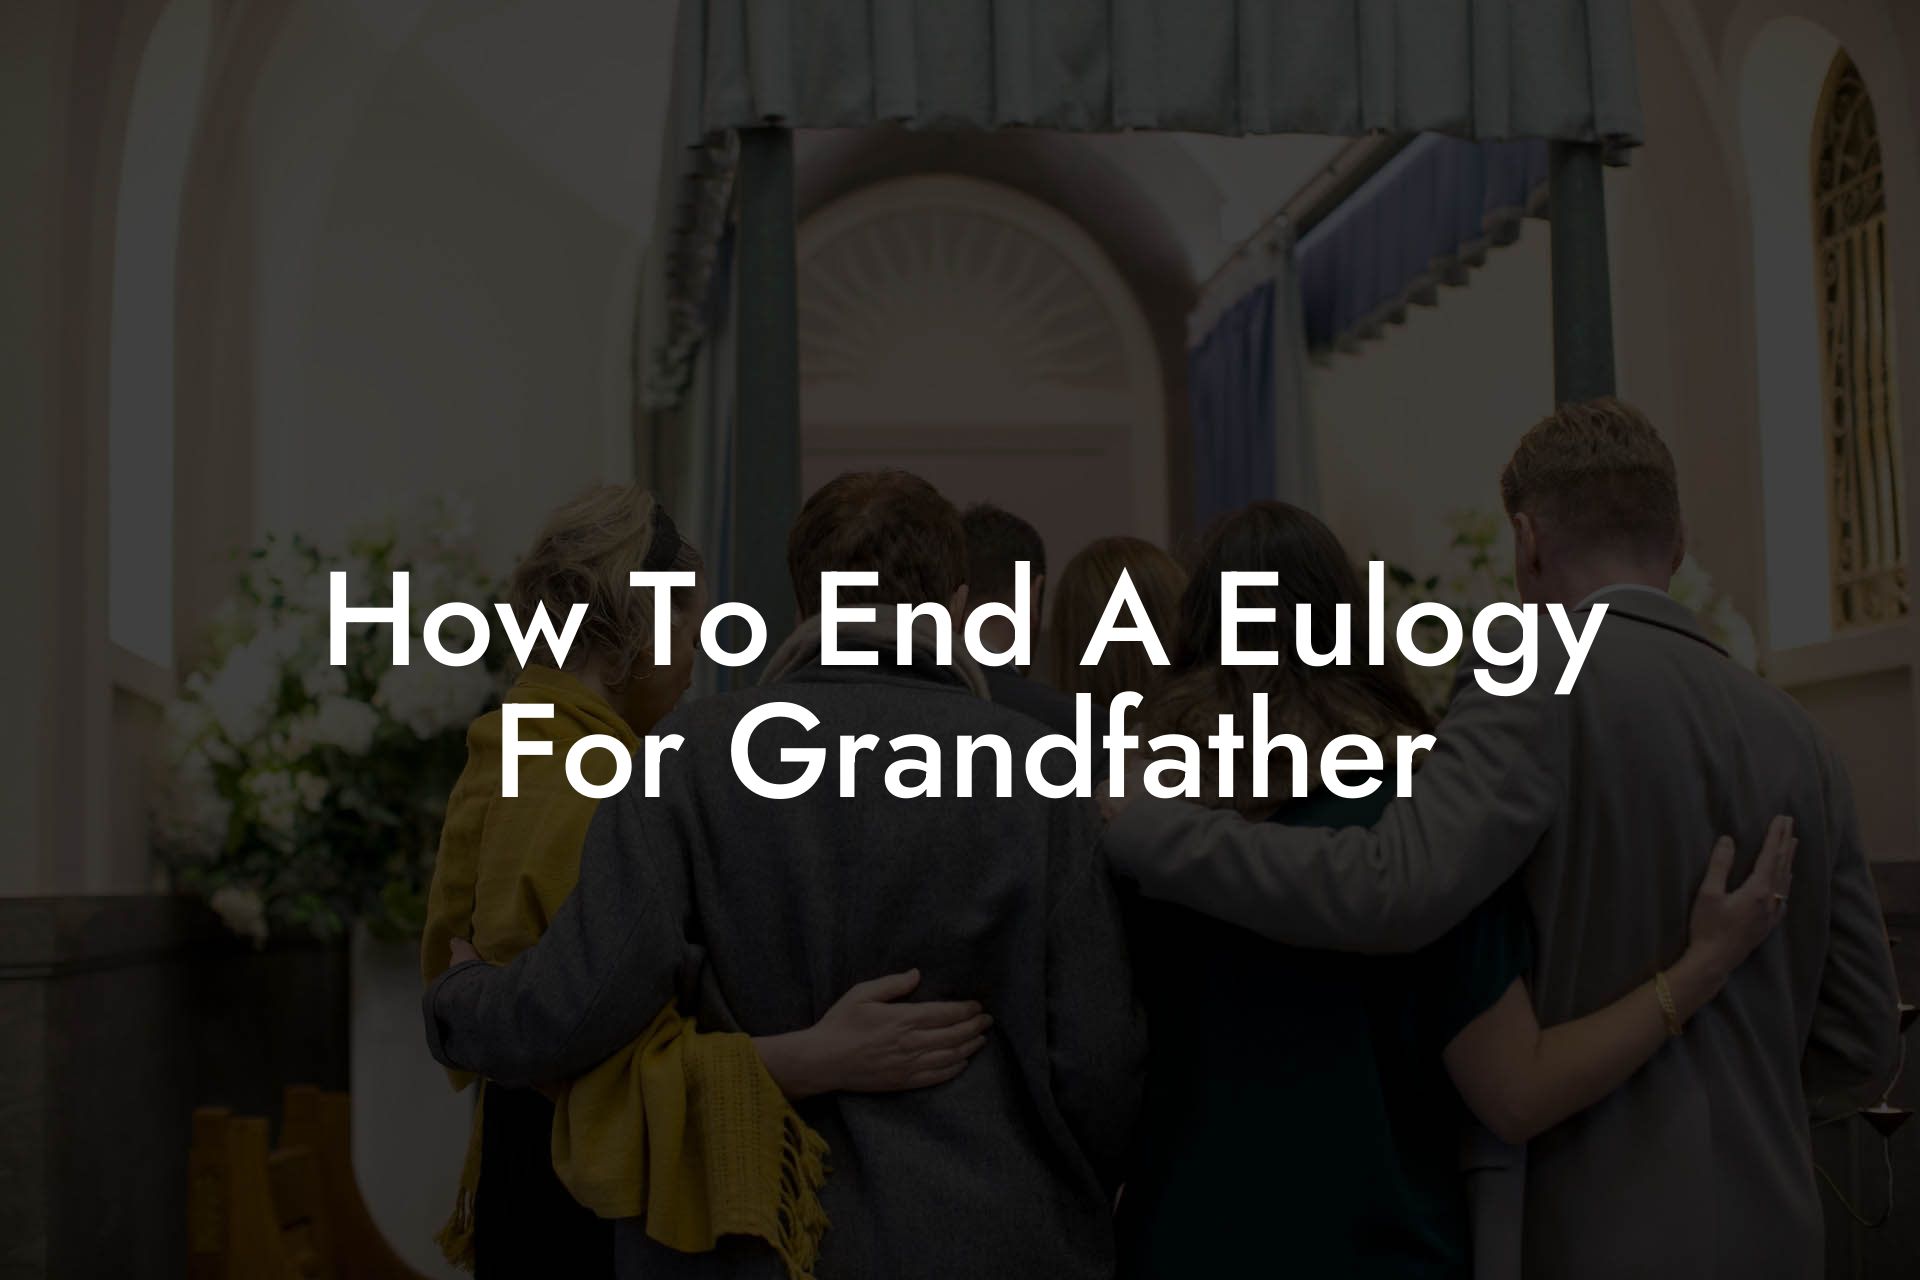 How To End A Eulogy For Grandfather